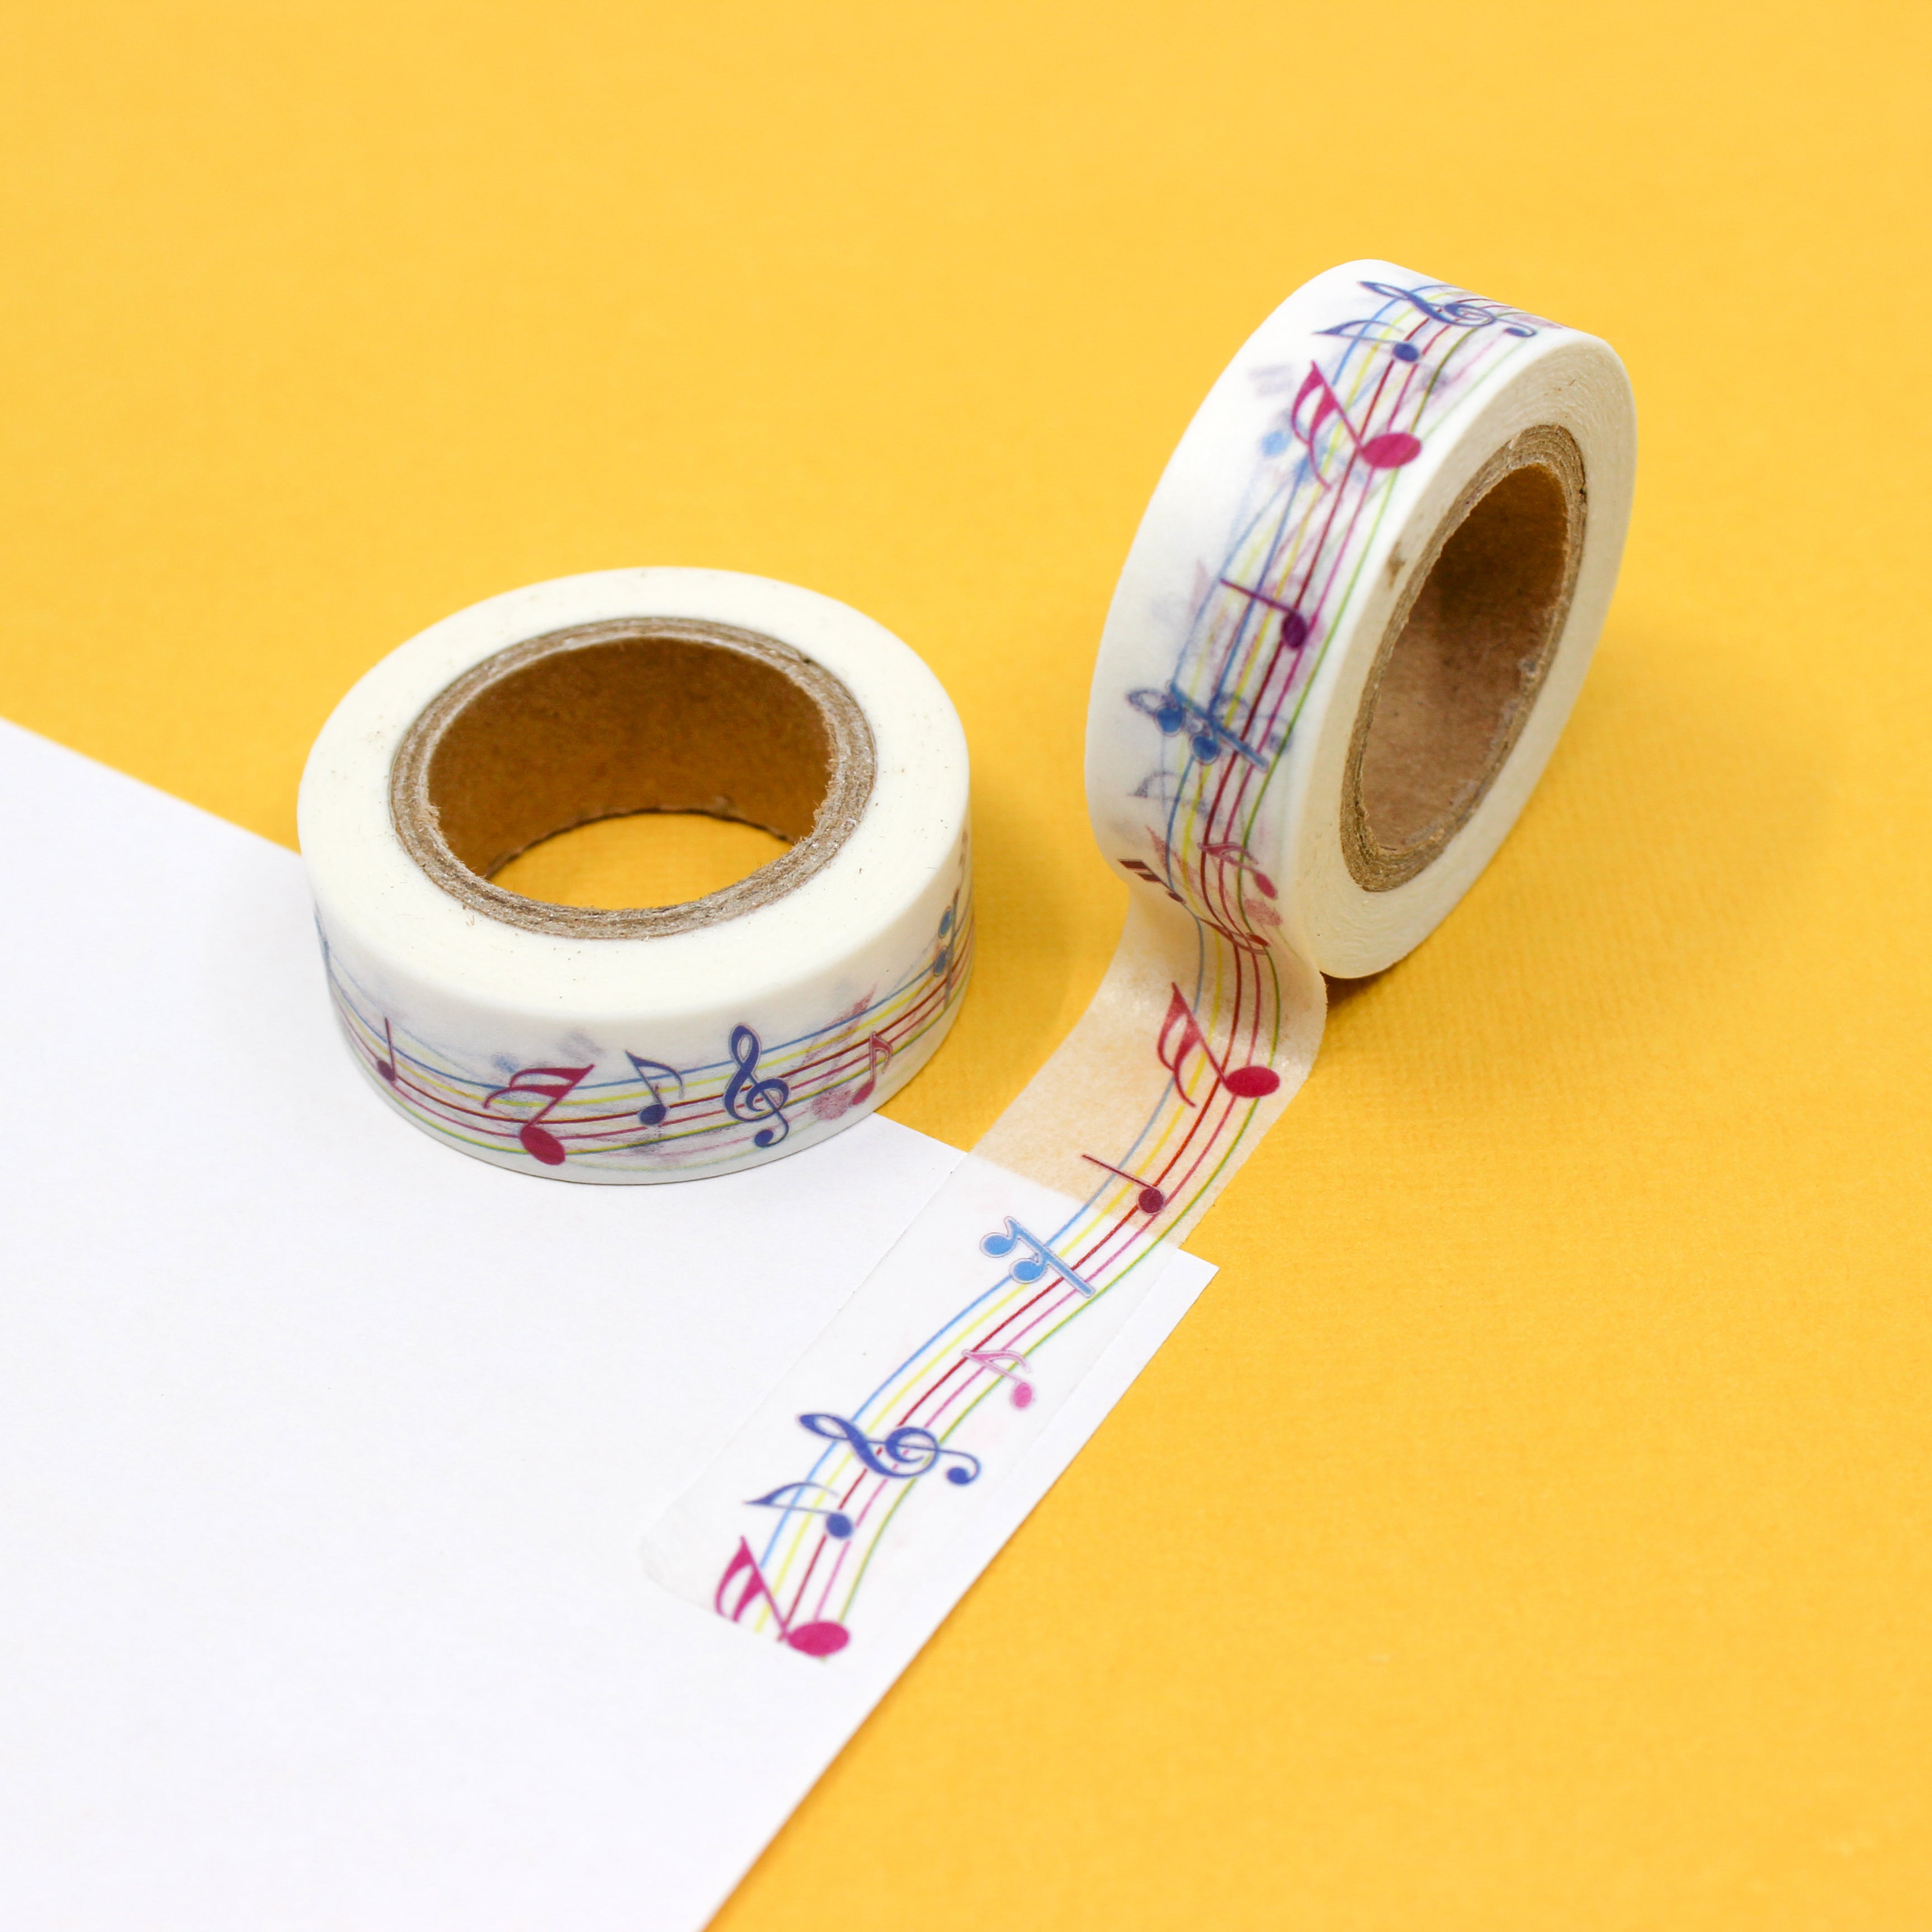 This is a colorful music scales pattern washi tape from BBB Supplies Craft Shop